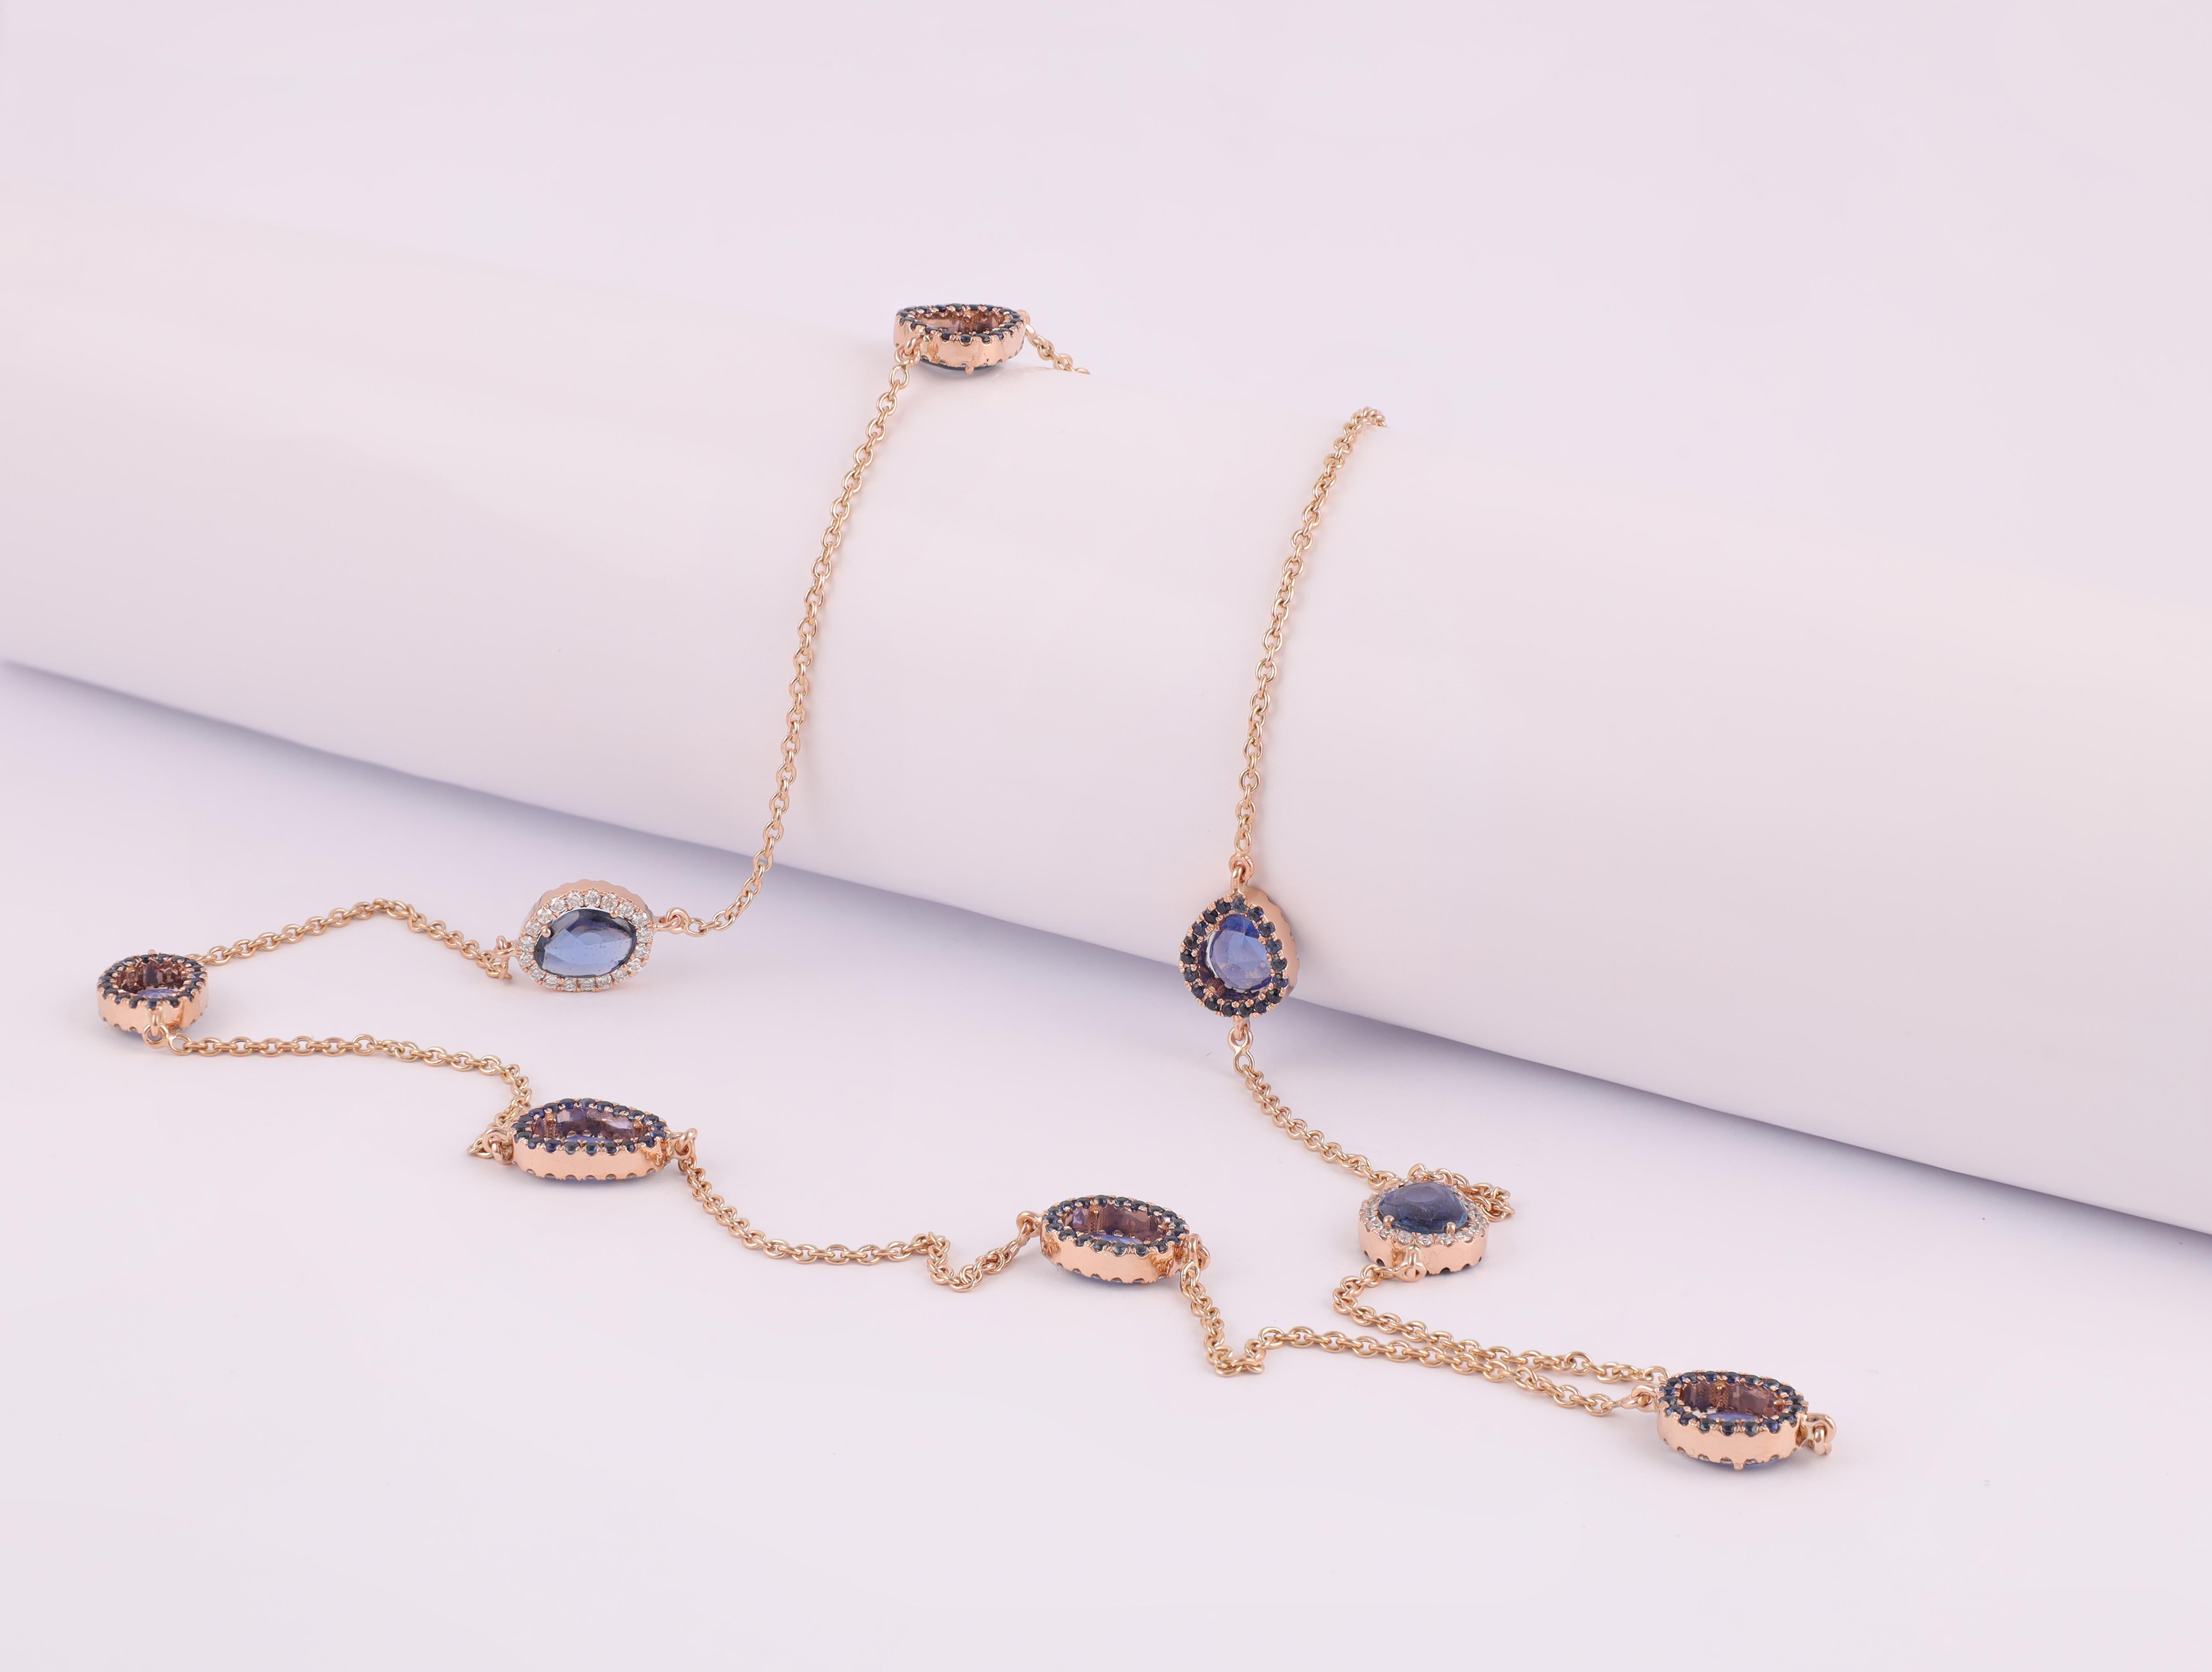 7.83 Carats Blue Sapphire & 1.23 Carats Diamond Chain Necklace in 18k Rose Gold  In New Condition For Sale In Jaipur, Rajasthan